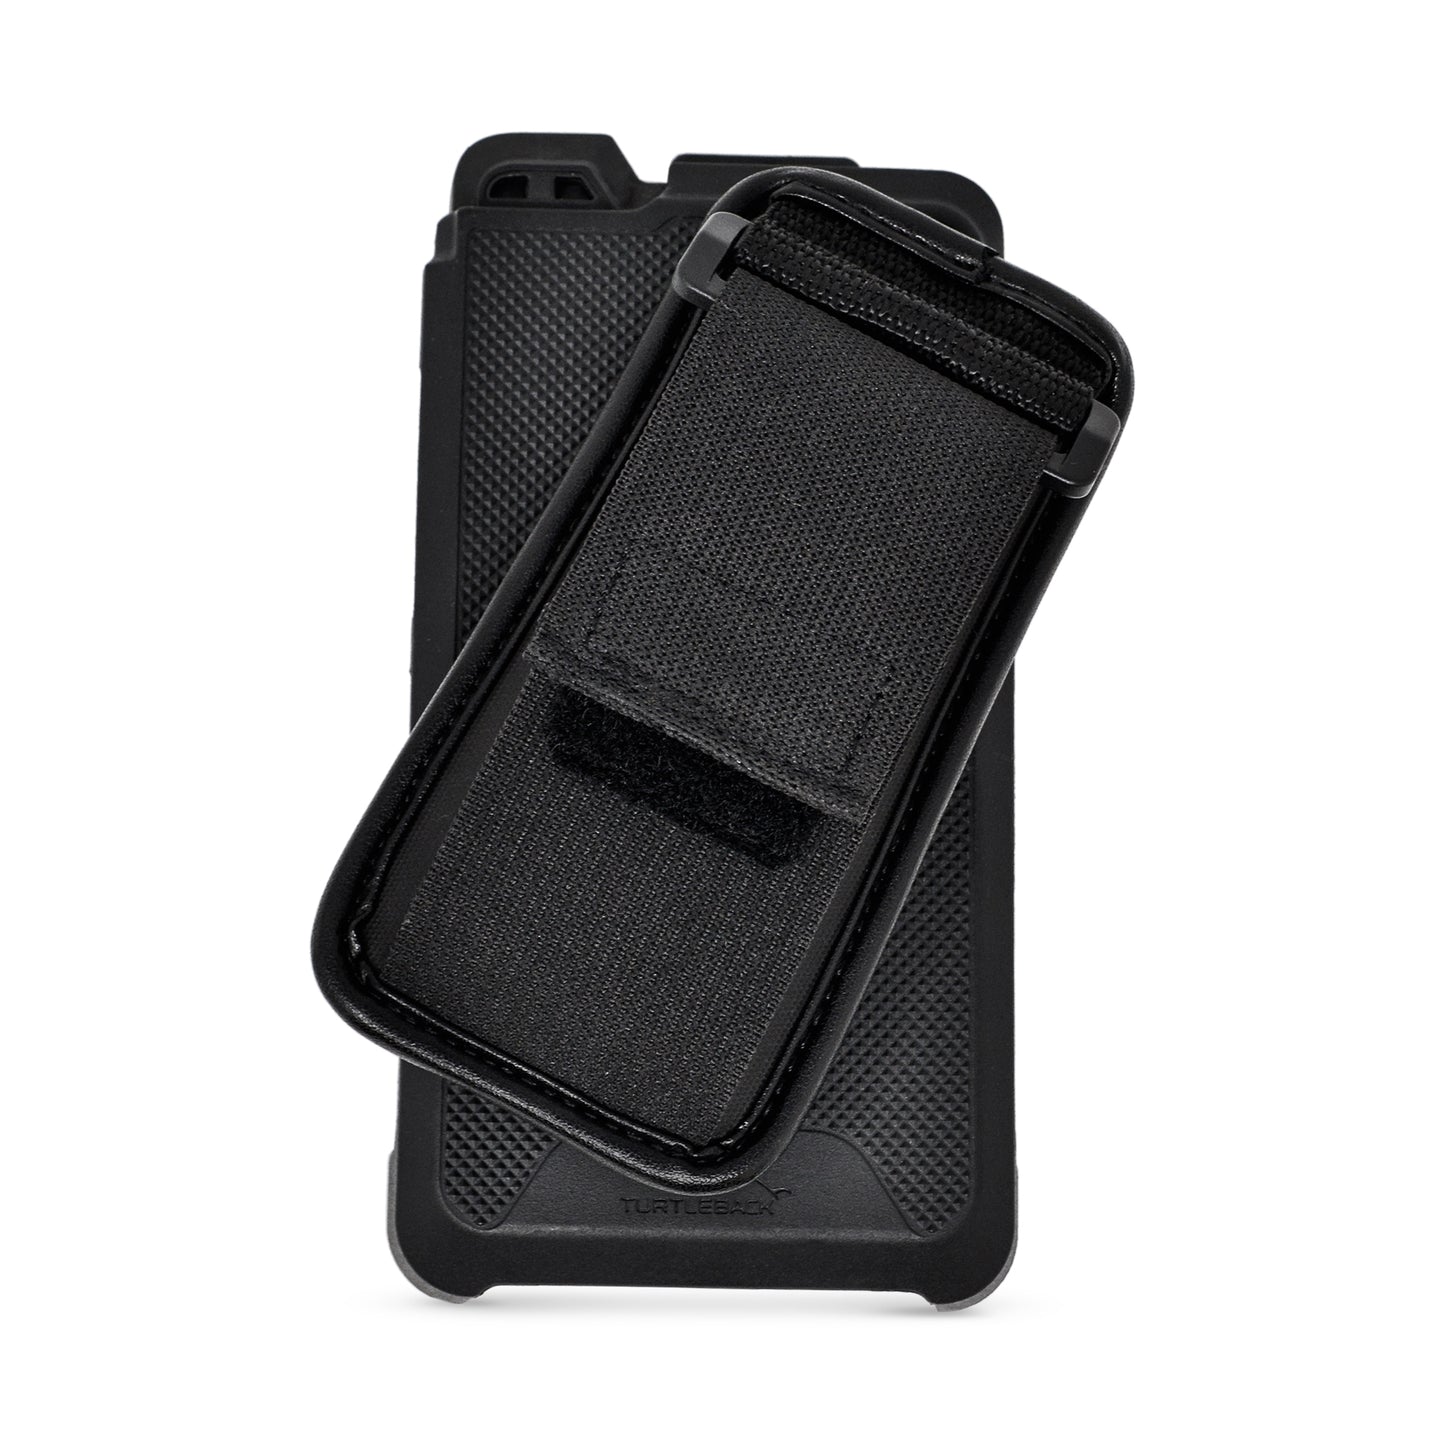 Turtleback Plastic Hand Held Clip compatible with all Unbreakable Plastic Balastec Holsters